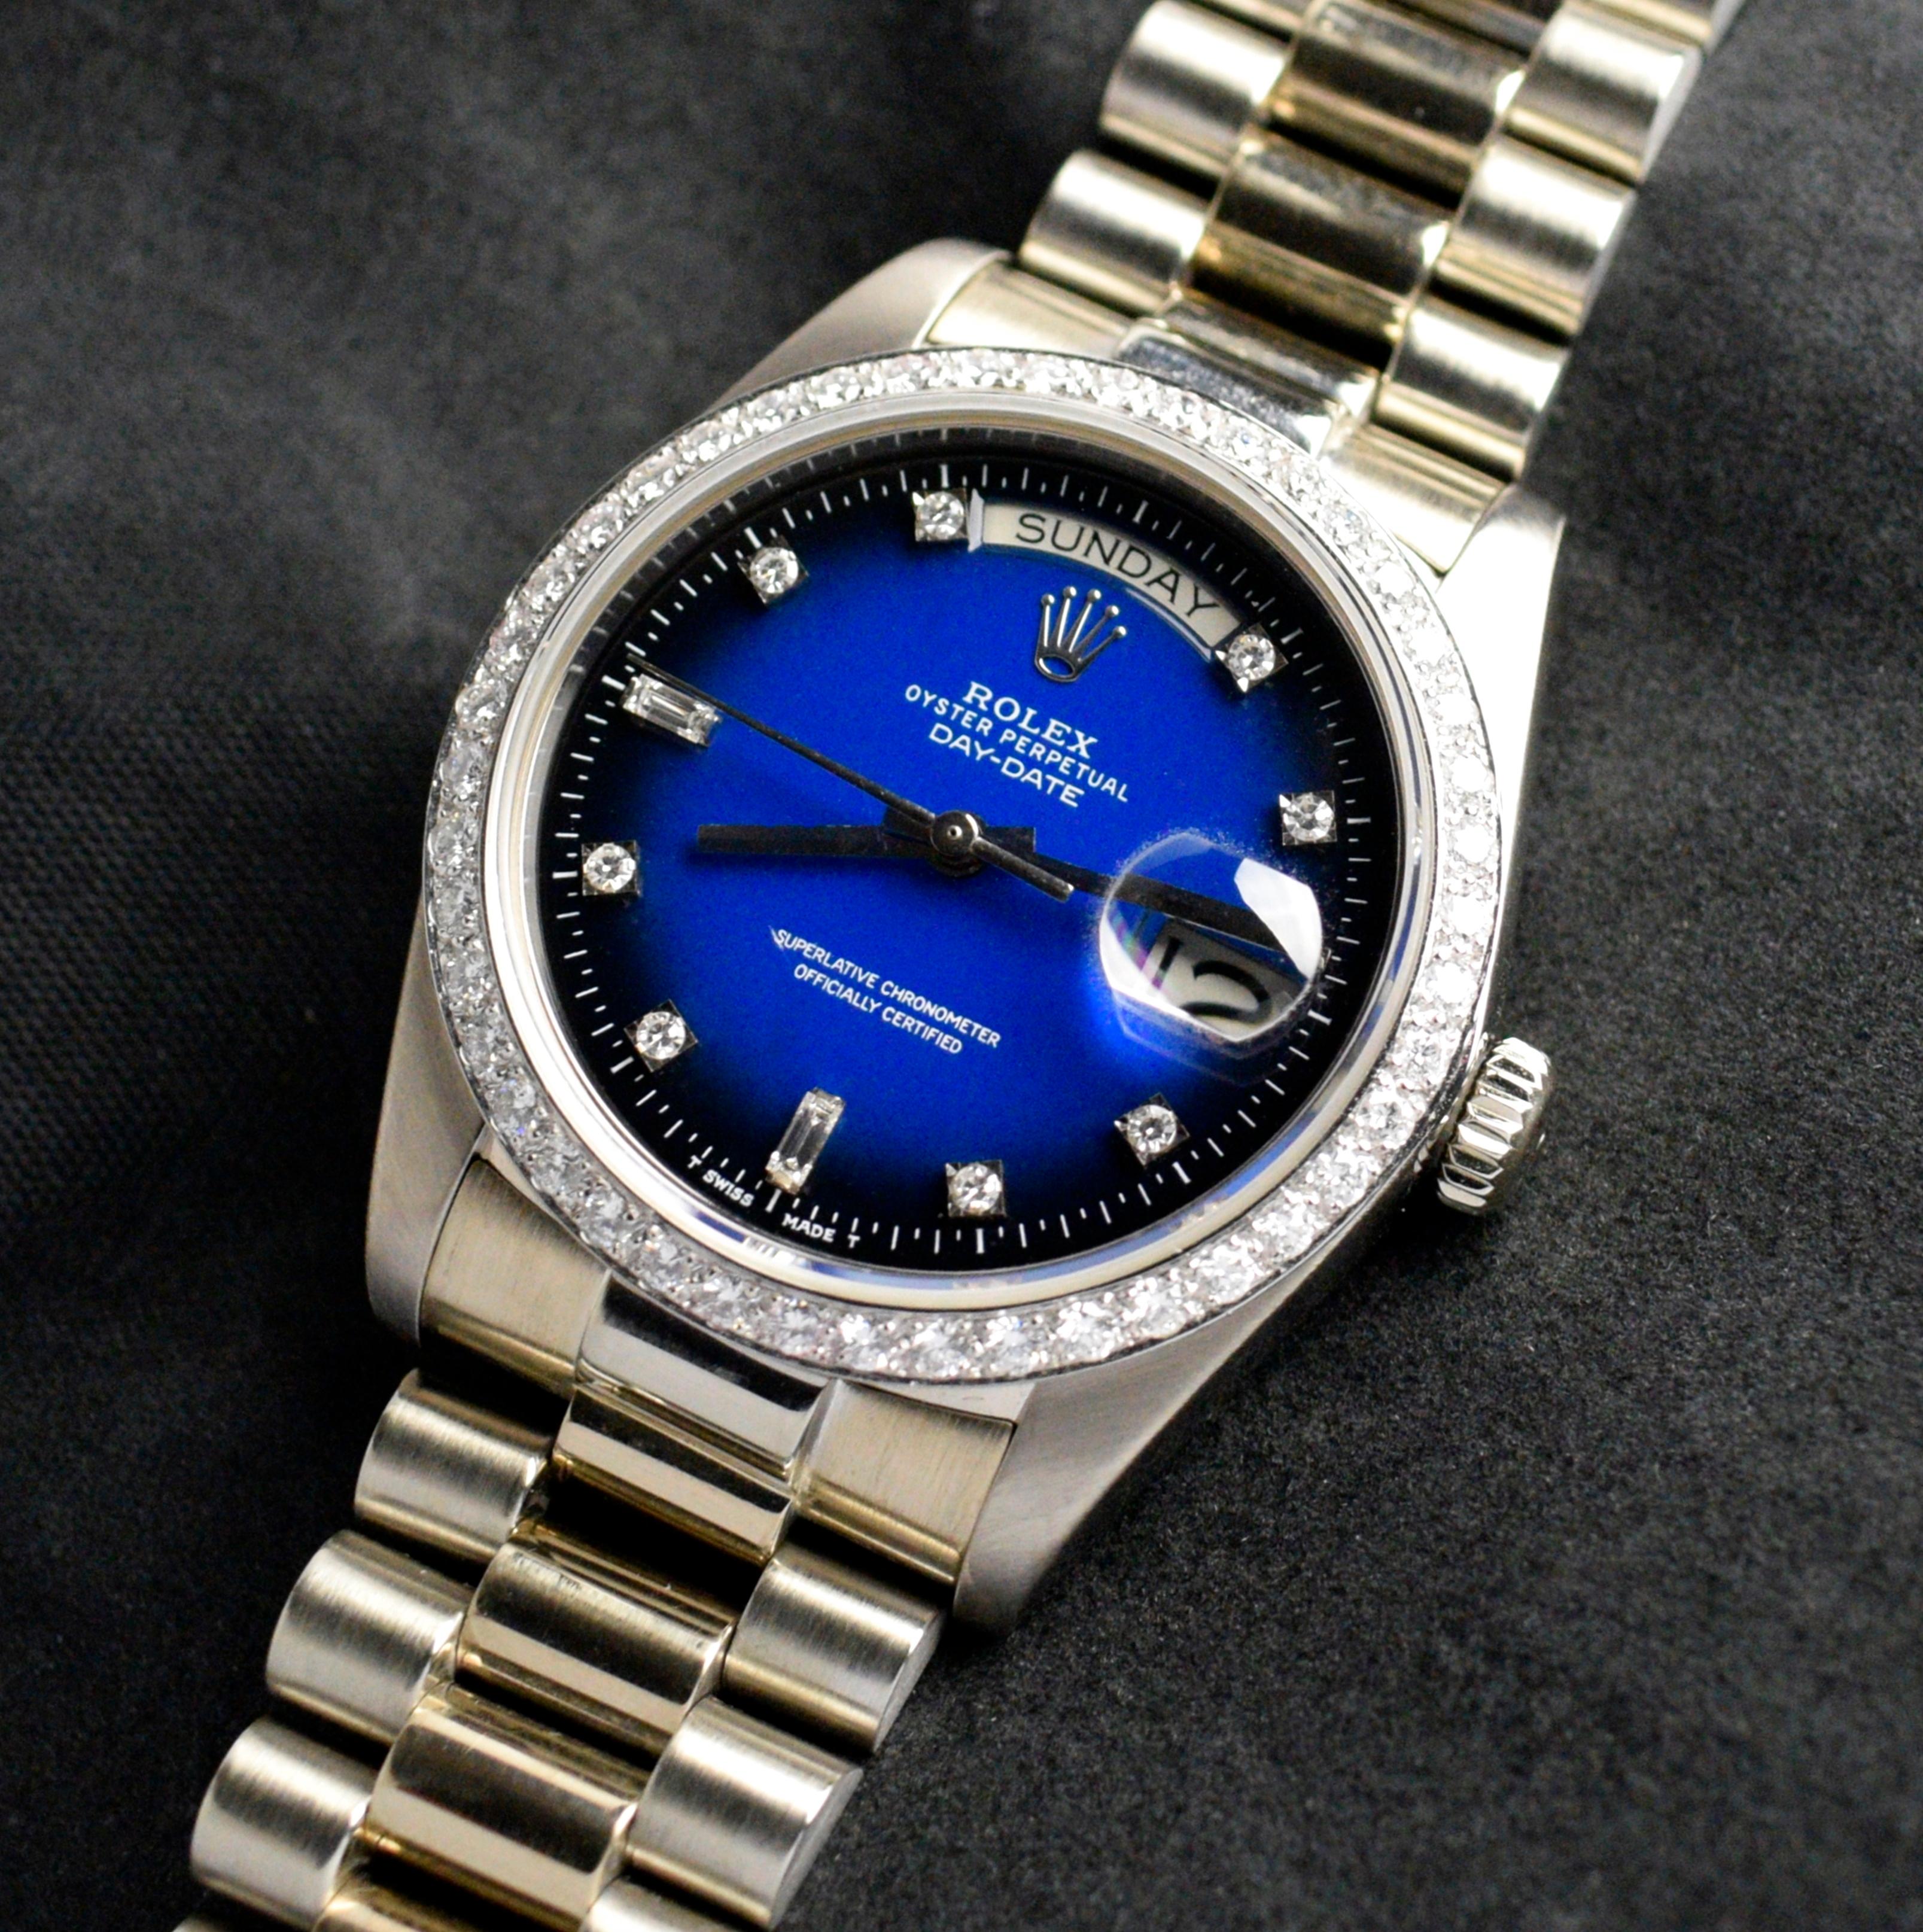 Brand: Vintage Rolex
Model: 18049
Year: 1982
Serial number: 76xxxxx
Reference: C03782

Case: 18K White gold 36mm without crown; Show sign of wear with slight polish from previous; inner case back stamped 18000

Dial: Excellent Condition Ombre Blue